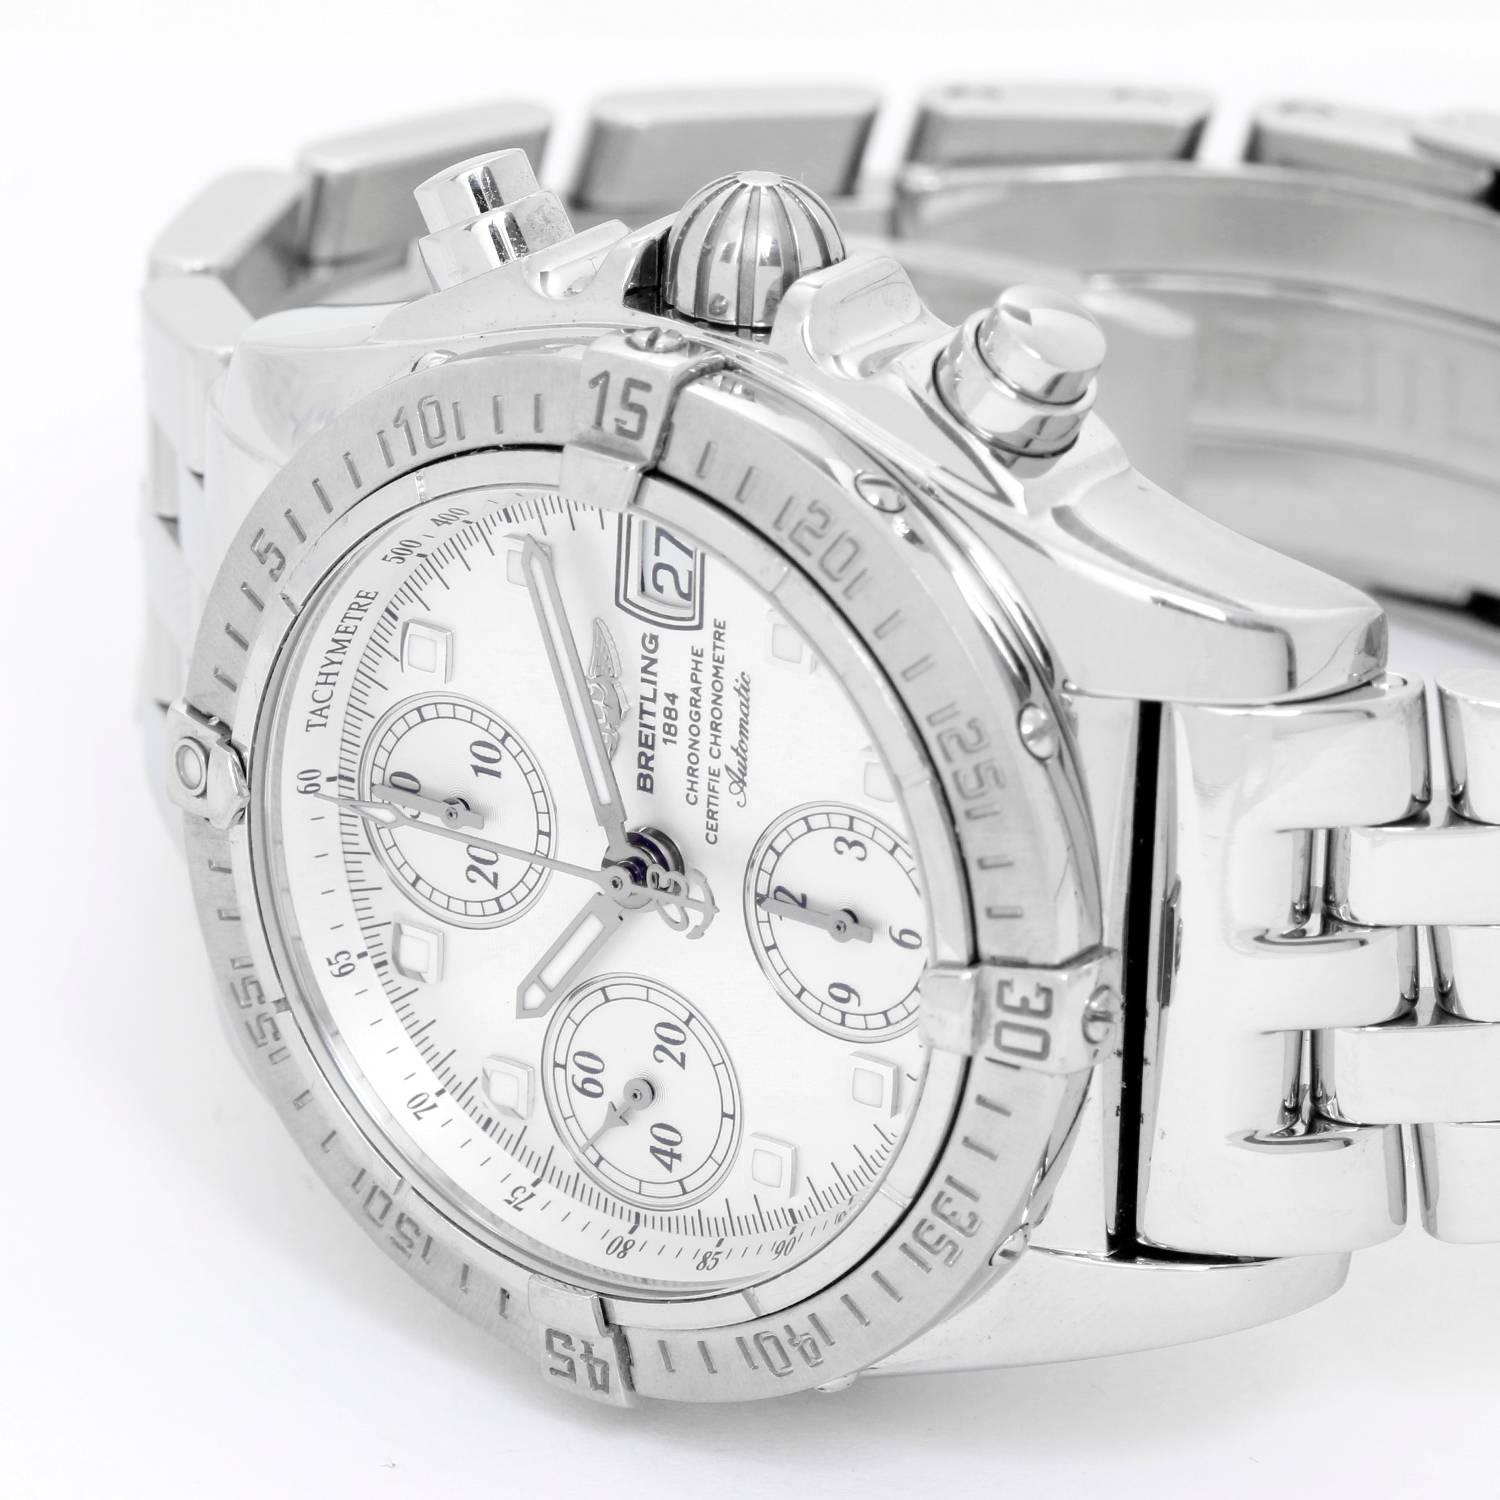 Breitling Chrono Cockpit Chronograph Men's Steel  Watch A13357 -  Automatic winding chronograph. Stainless steel case with rotating bezel (39mm diameter). Silver dial with silver subdials; hour, minute and seconds recorders; date at 3 o'clock.